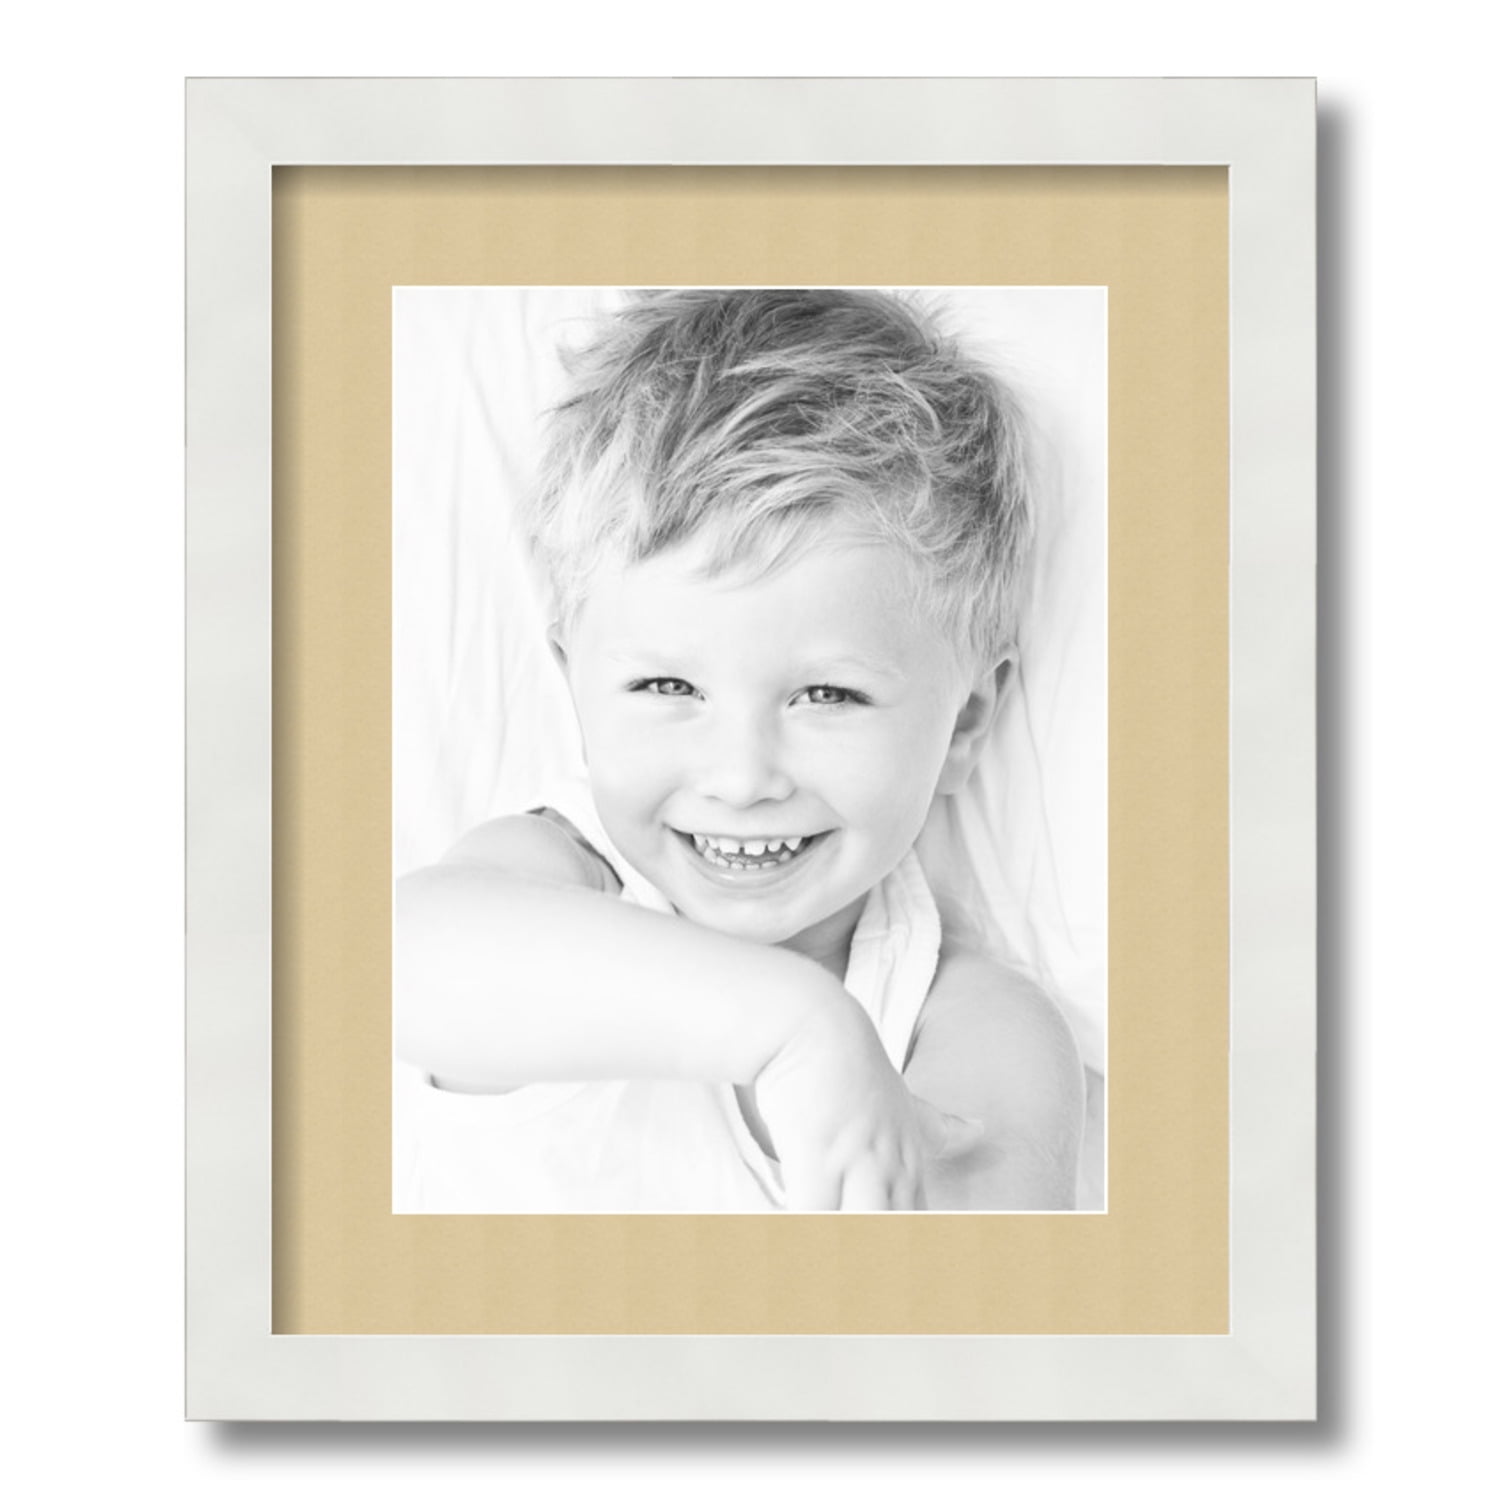  ArtToFrames 13x17 inch Satin White Frame Picture Frame,  2WOMFRBW26074-13x17 - Single Frames